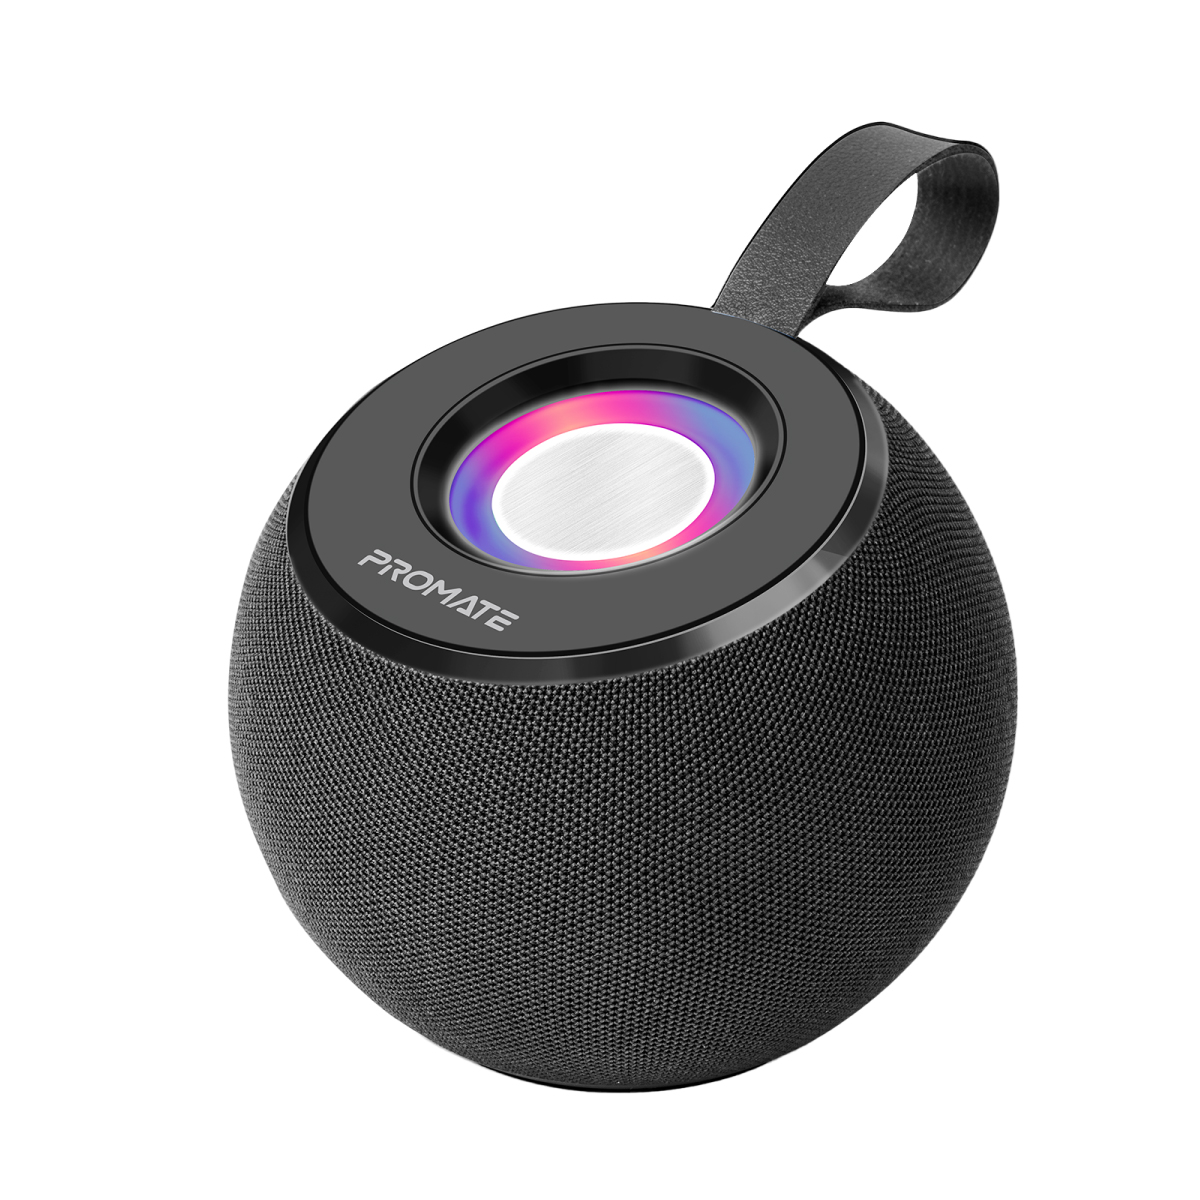 Promate Bluetooth Speaker, Premium 5W True Wireless Portable LED Speaker with 360-Degree HD Sound, LED Light, Long Playtime, USB Port and TF Card Slot for iPhone 14, iPad Air, iPod, Galaxy S22, Juggler.Blue